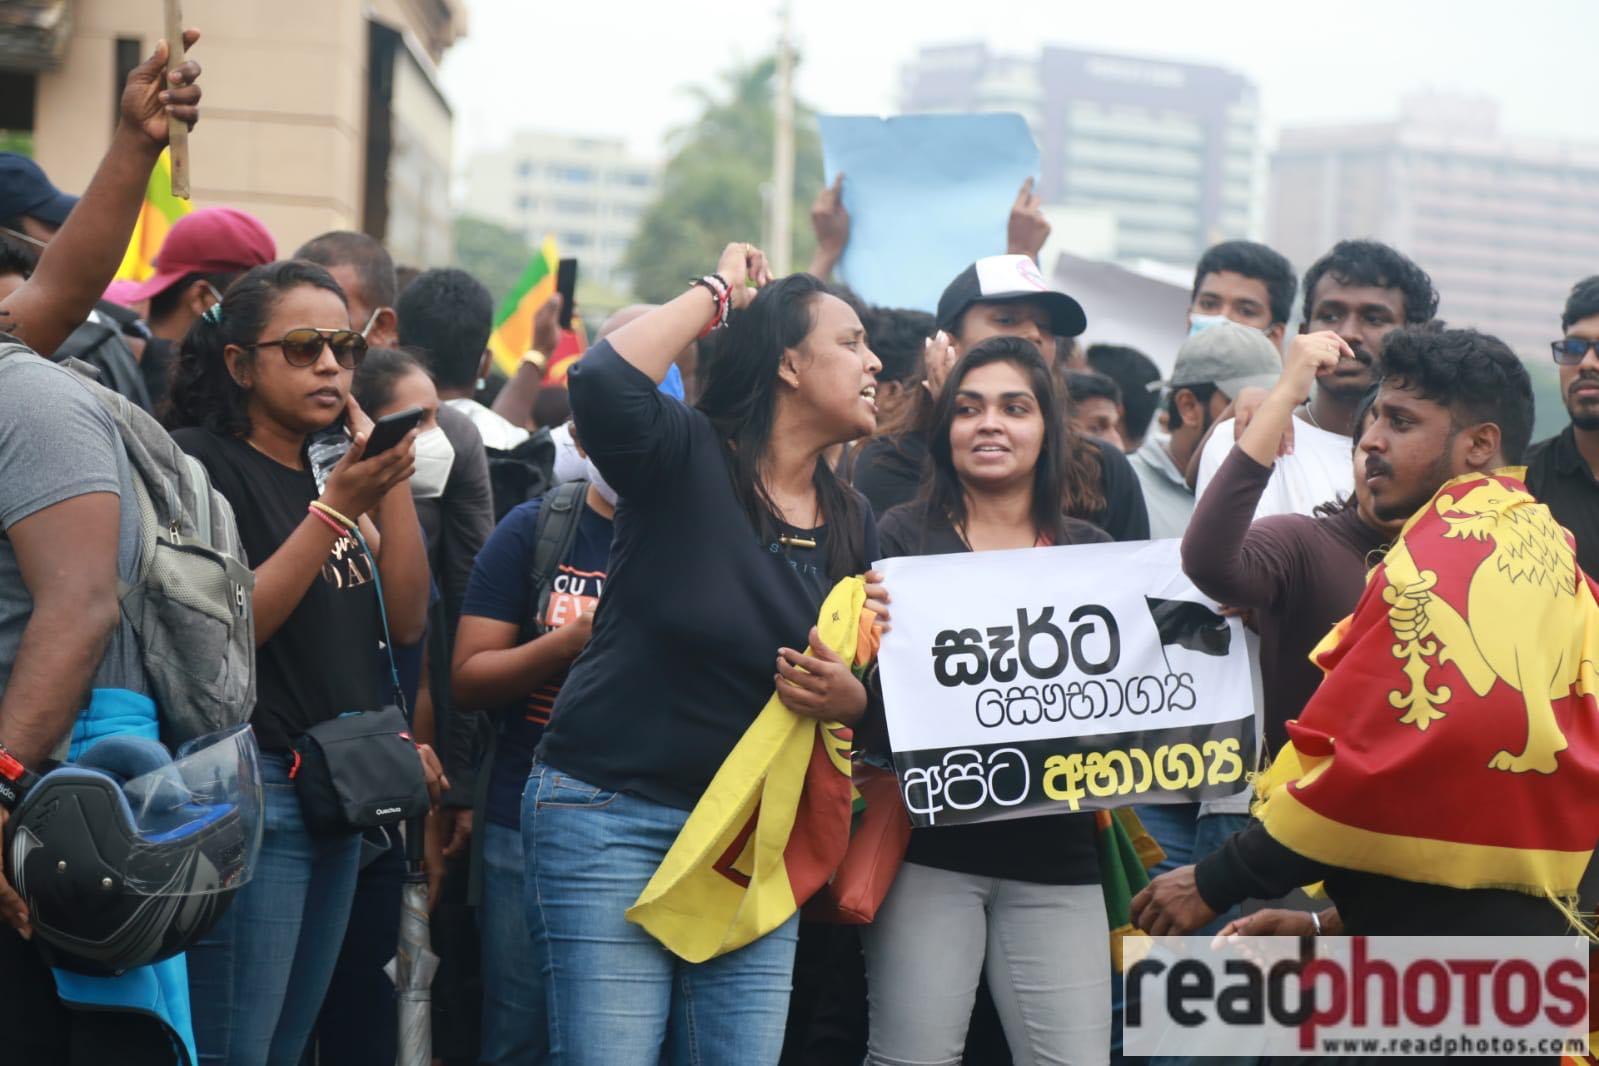 Sri Lankans protests against the government - Galle Face 10.04.2022